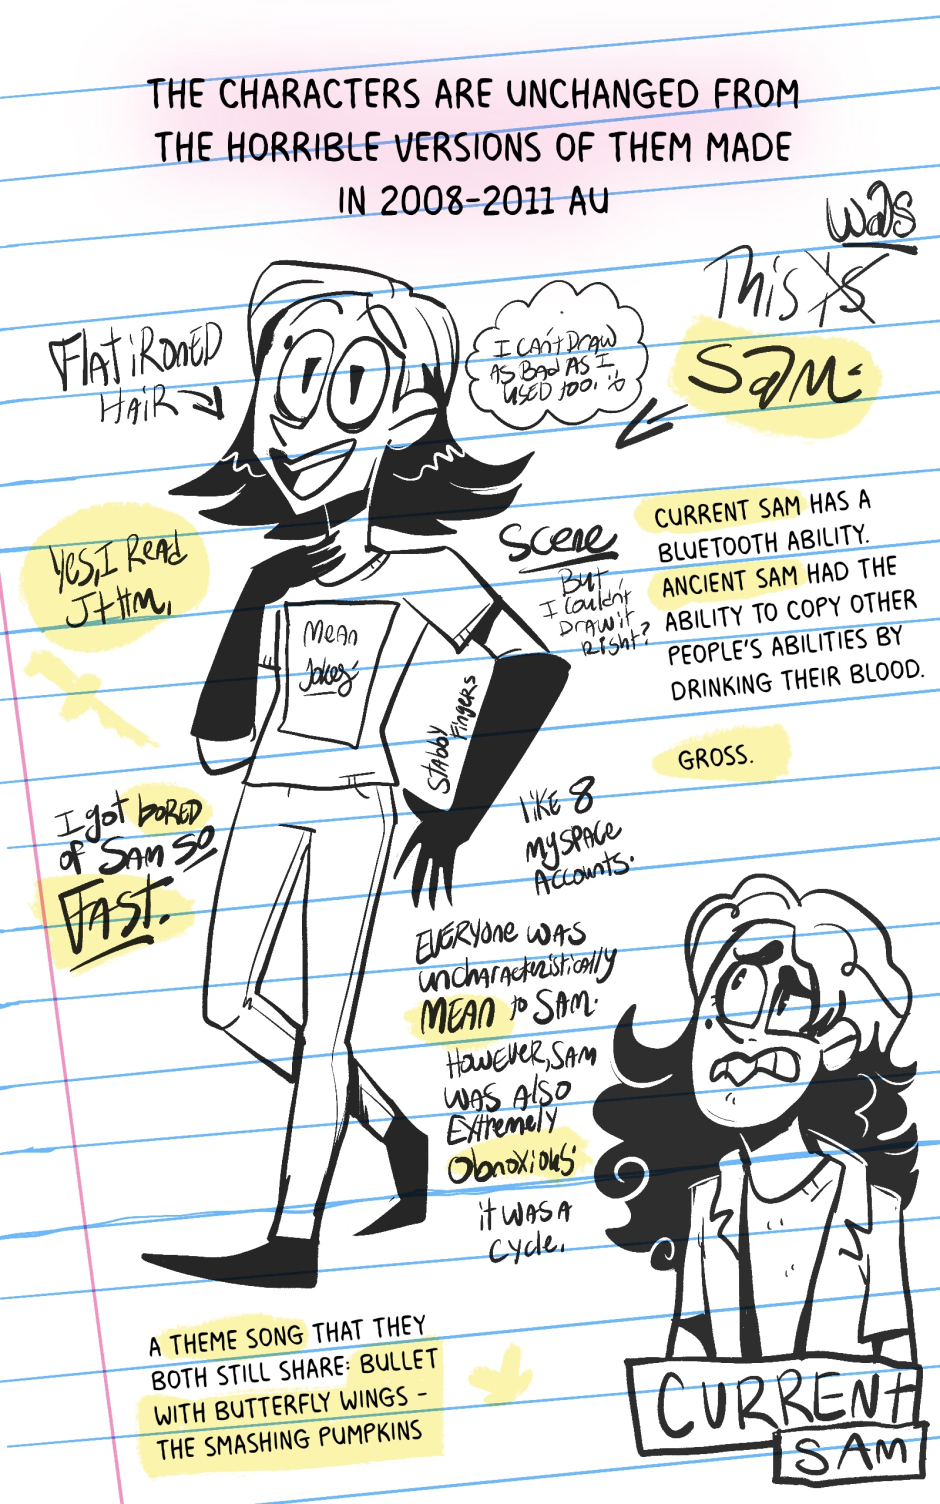 Crappy doodle comics from HS starring Sam were Skin-crawling Cringe and Boring all at once. 